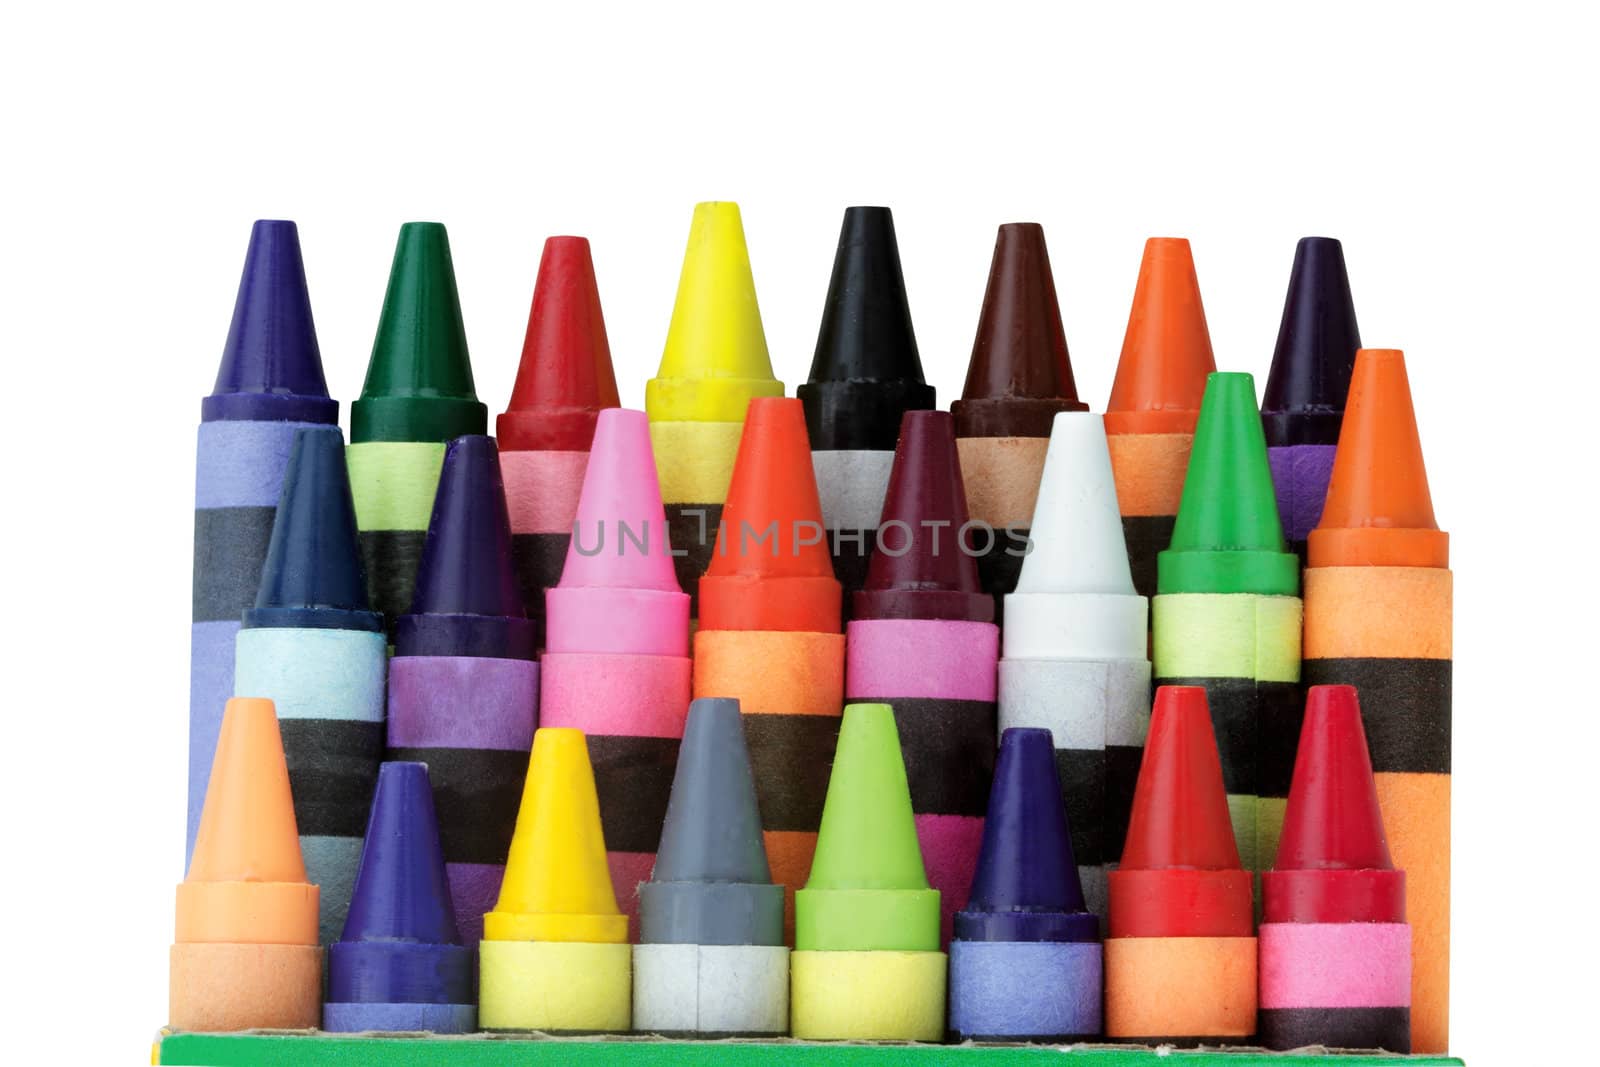 Crayons by StephanieFrey